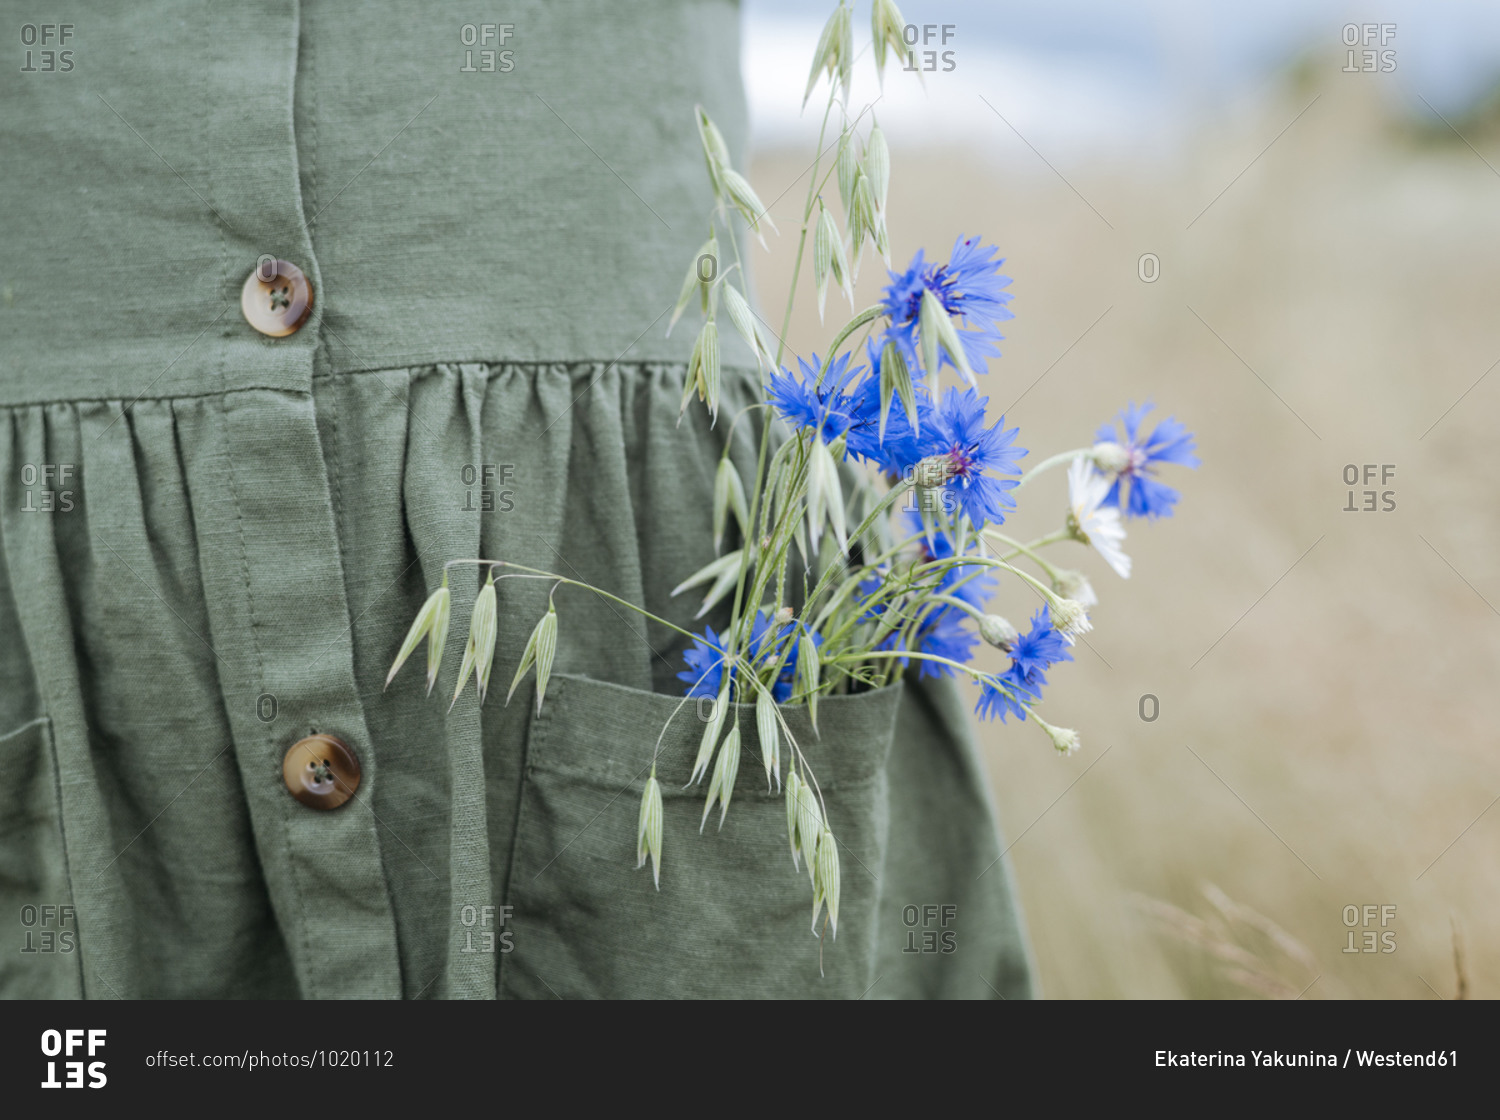 Bouquet of blue flowers and oat in the pocket of green dress